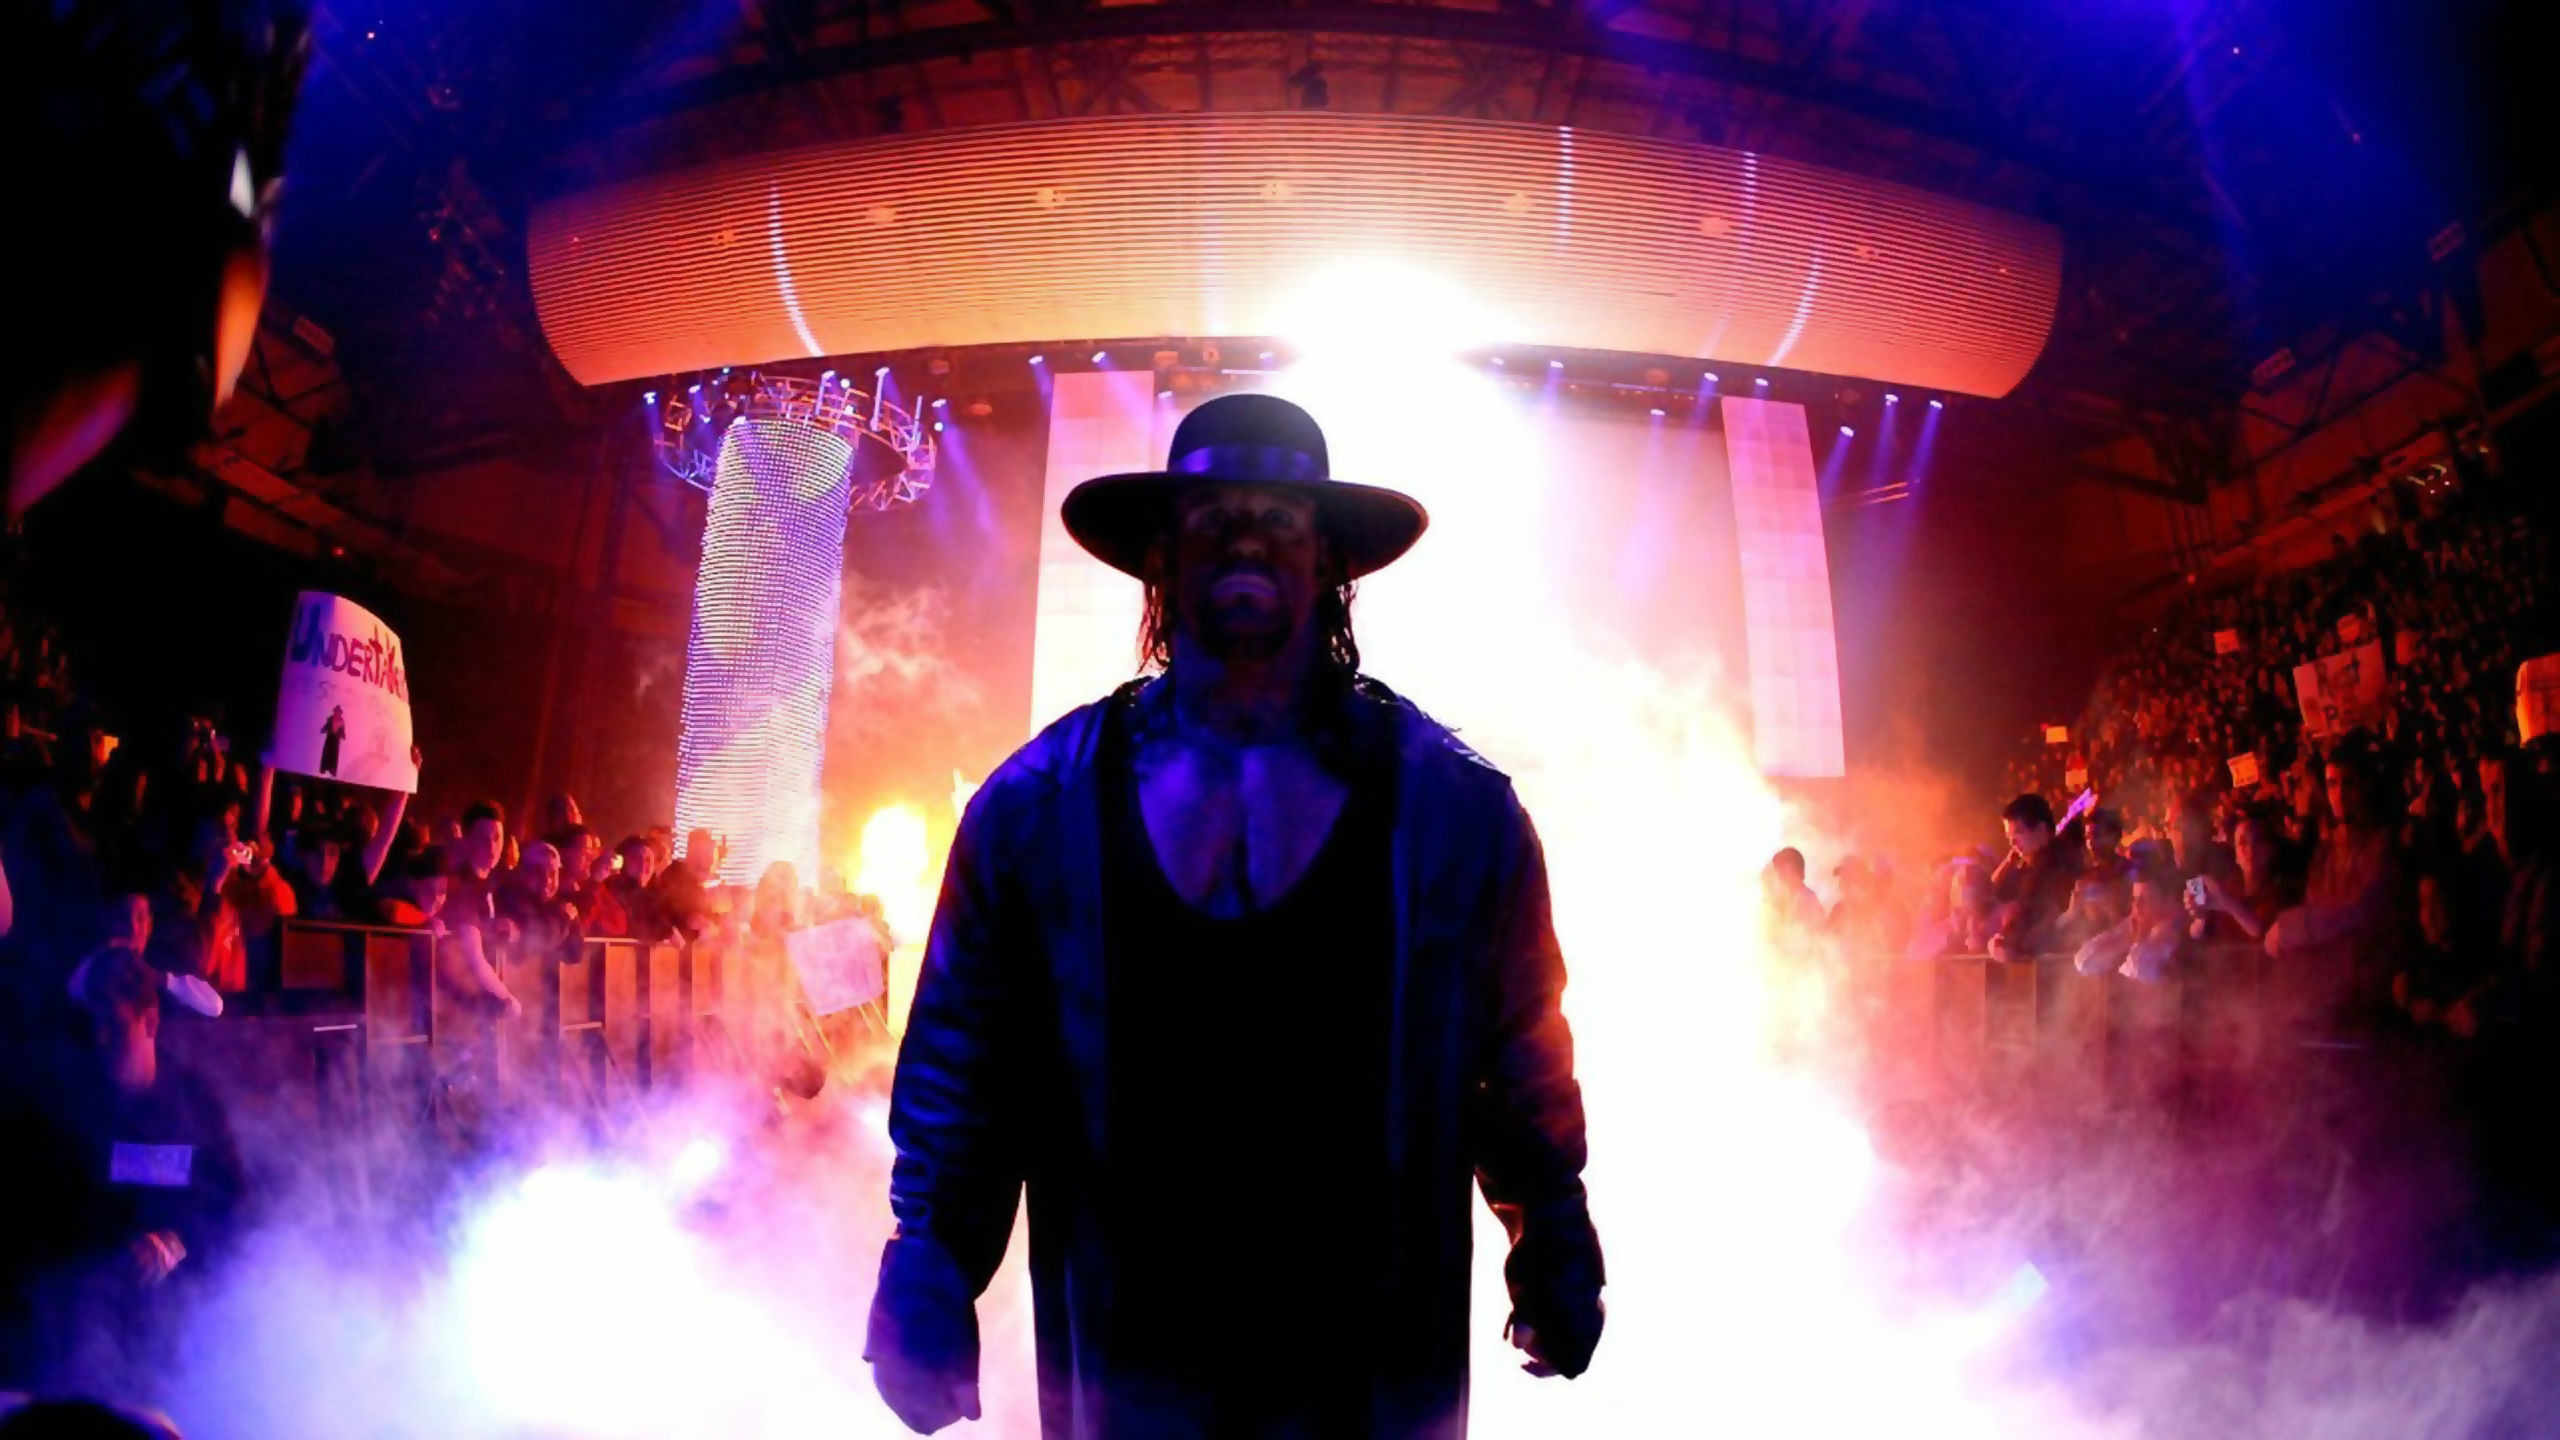 2560x1440 Check out Undertaker WWE Champion HD Photos And Undertaker HD Wallpapers in  widescreen resolution See WWE Superstar High Definition hd Images And The  ...